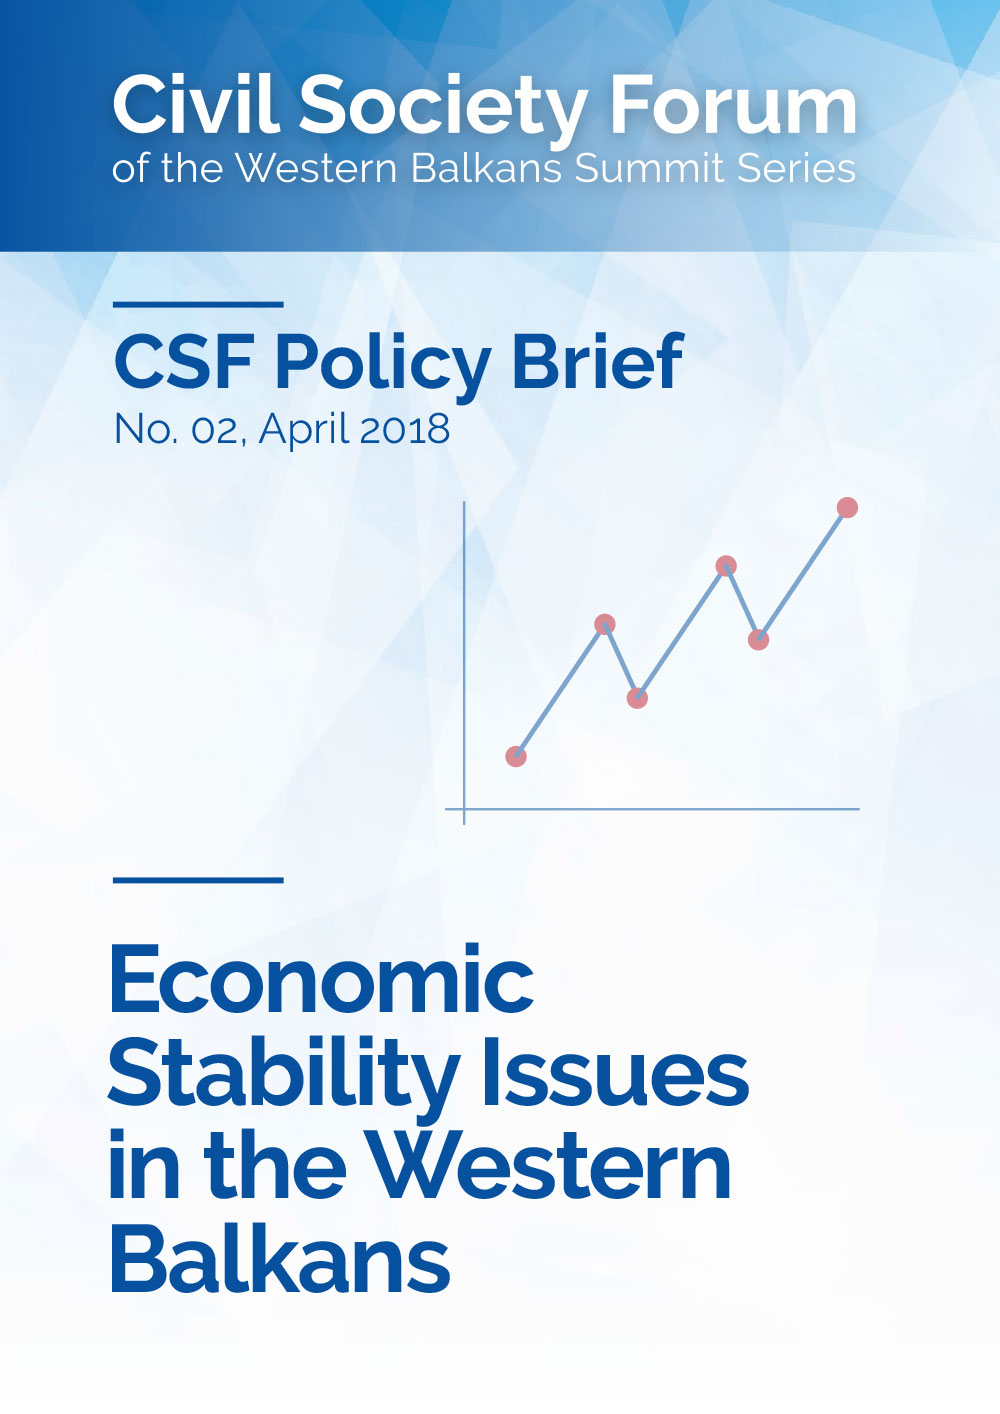 Economic Stability Issues in the Western Balkans